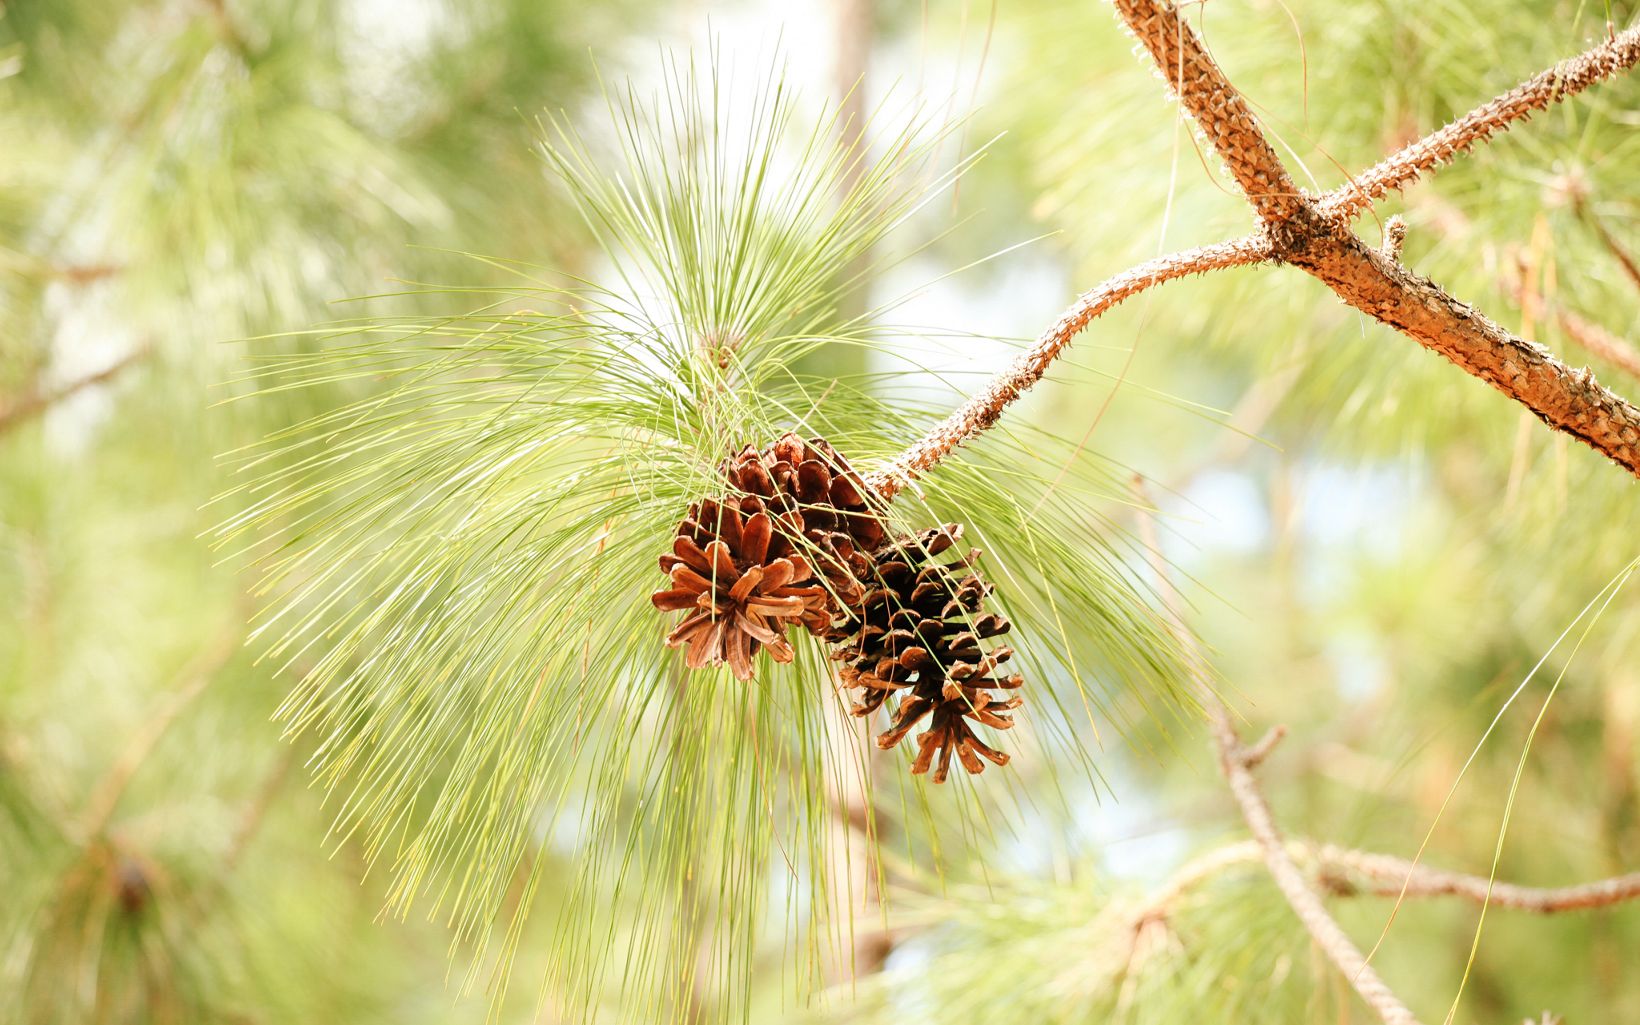 Nature's Ornaments Pinecones from longleaf pines and other regional tree species, like loblolly pines, are often used to decorate baskets. © Claire Everett/TNC